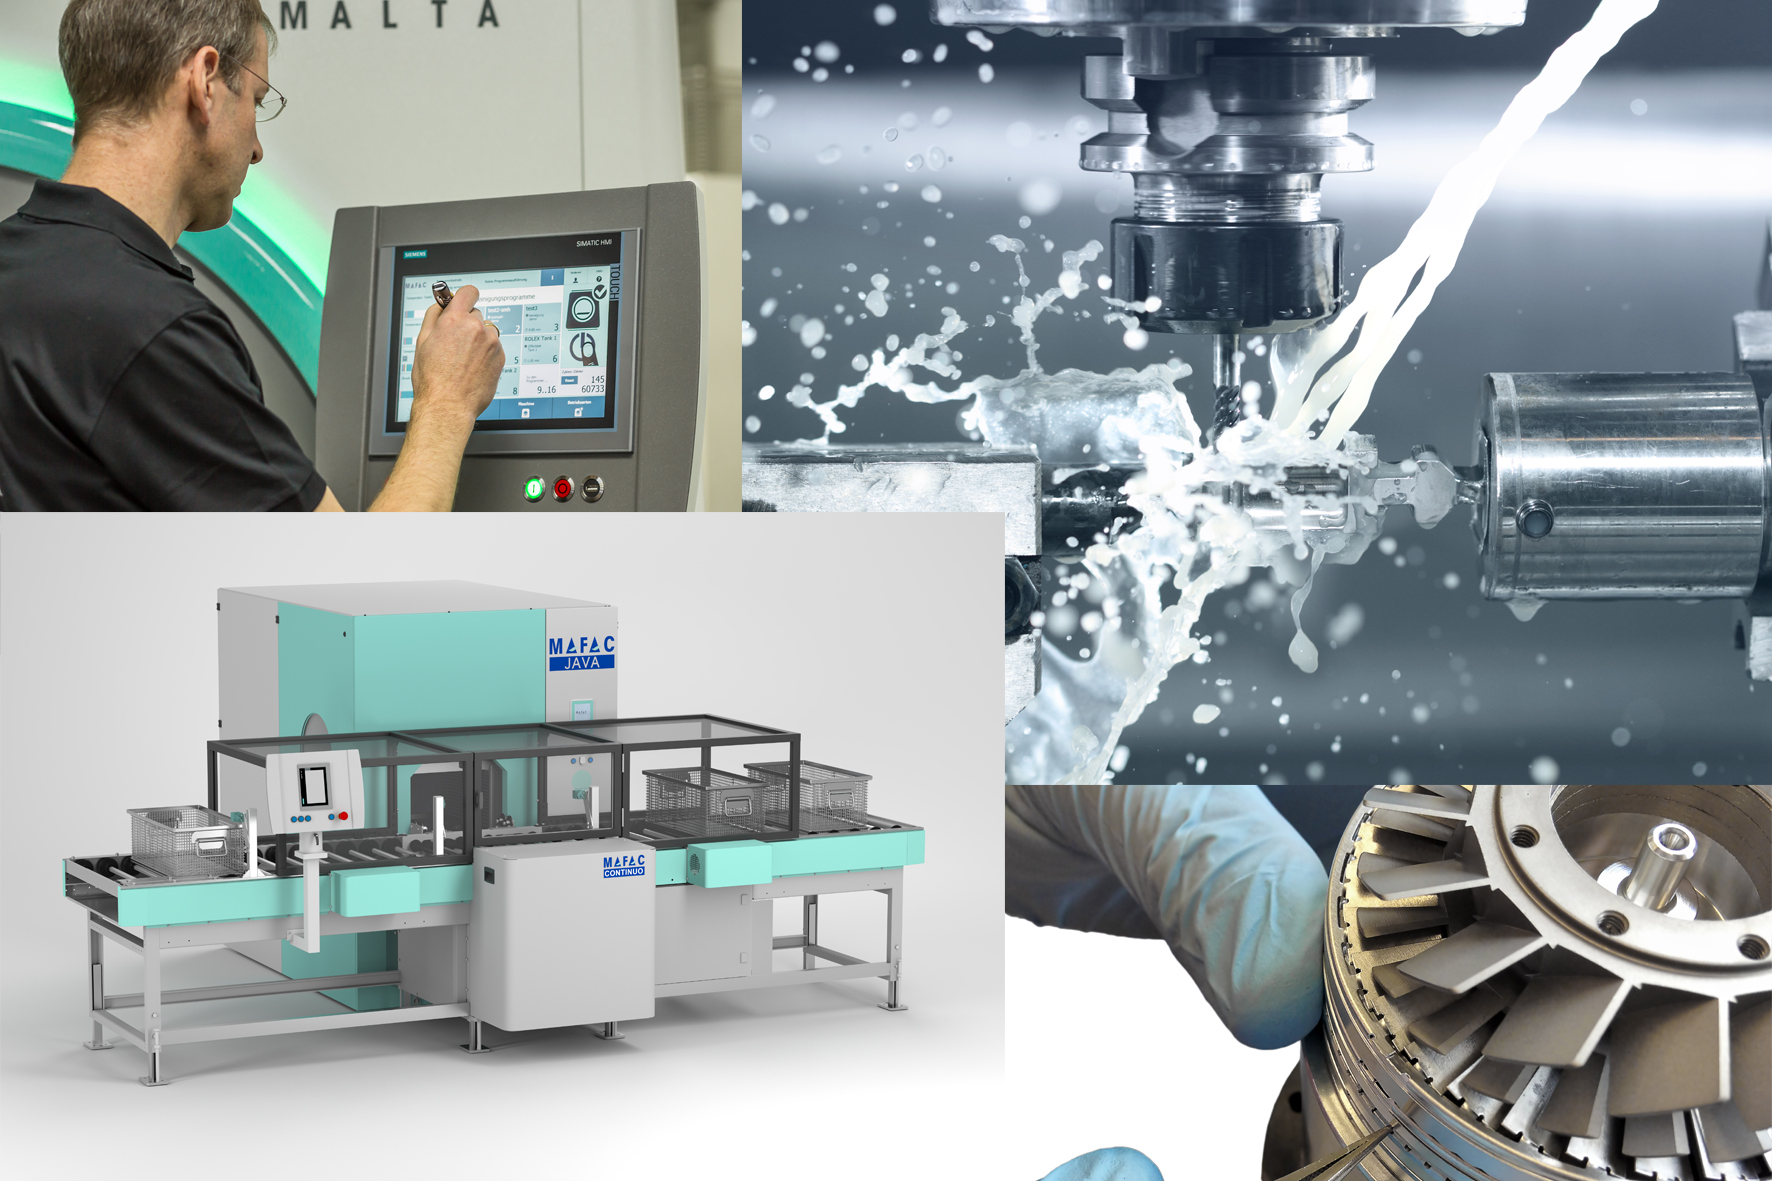 Intelligent control, fast fault diagnosis, effective and resource-saving cleaning, and compact solutions for tight manufacturing environments are the topics of Mafac's trade show presentation at AMB 2022. © Mafac